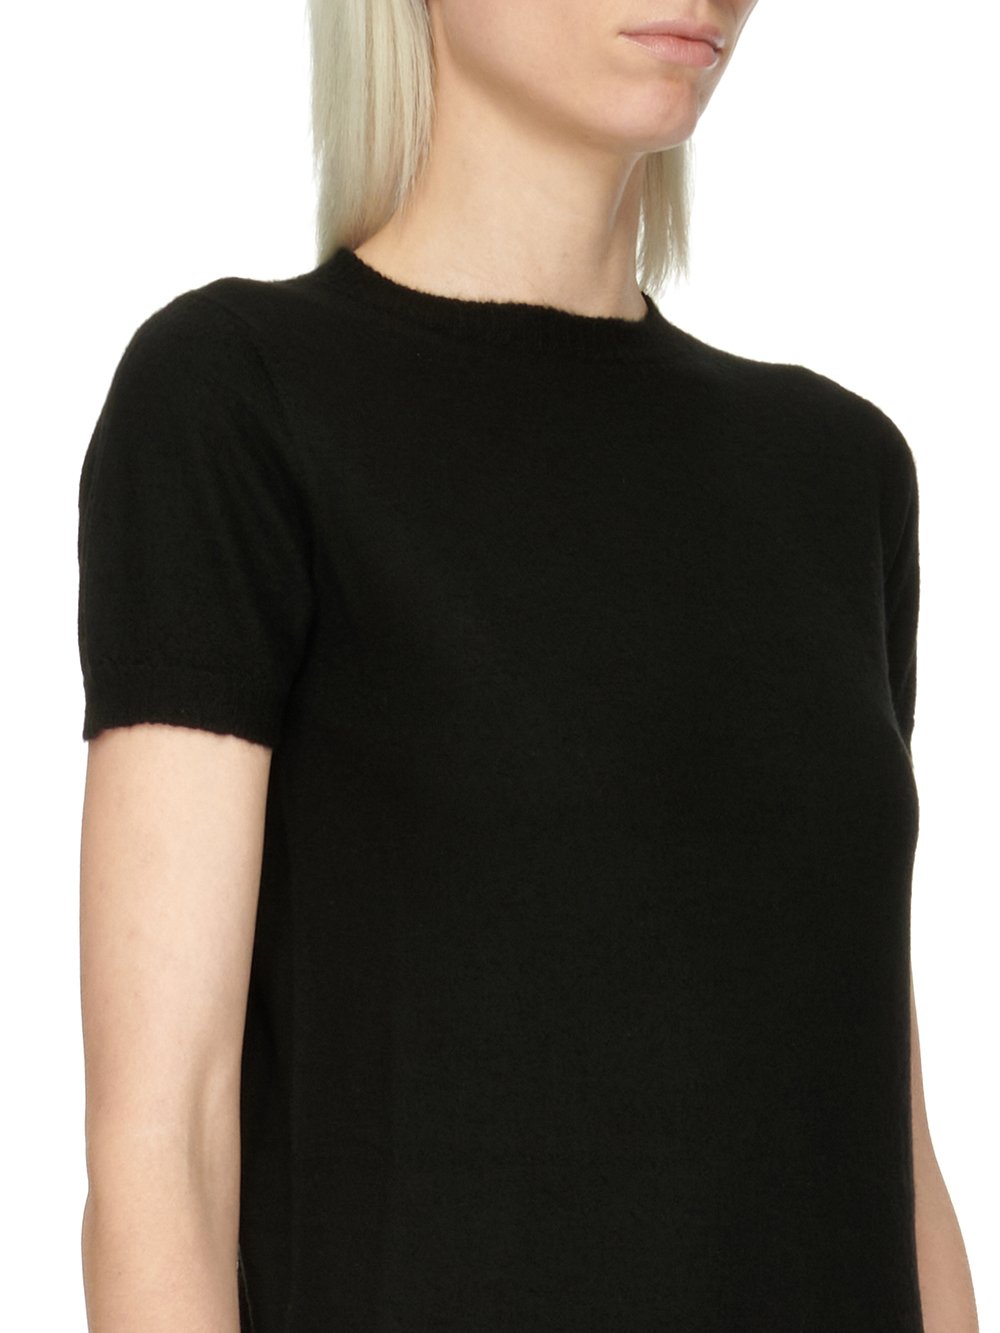 RICK OWENS FOREVER SS TUNIC IN BLACK BOILED CASHMERE. 